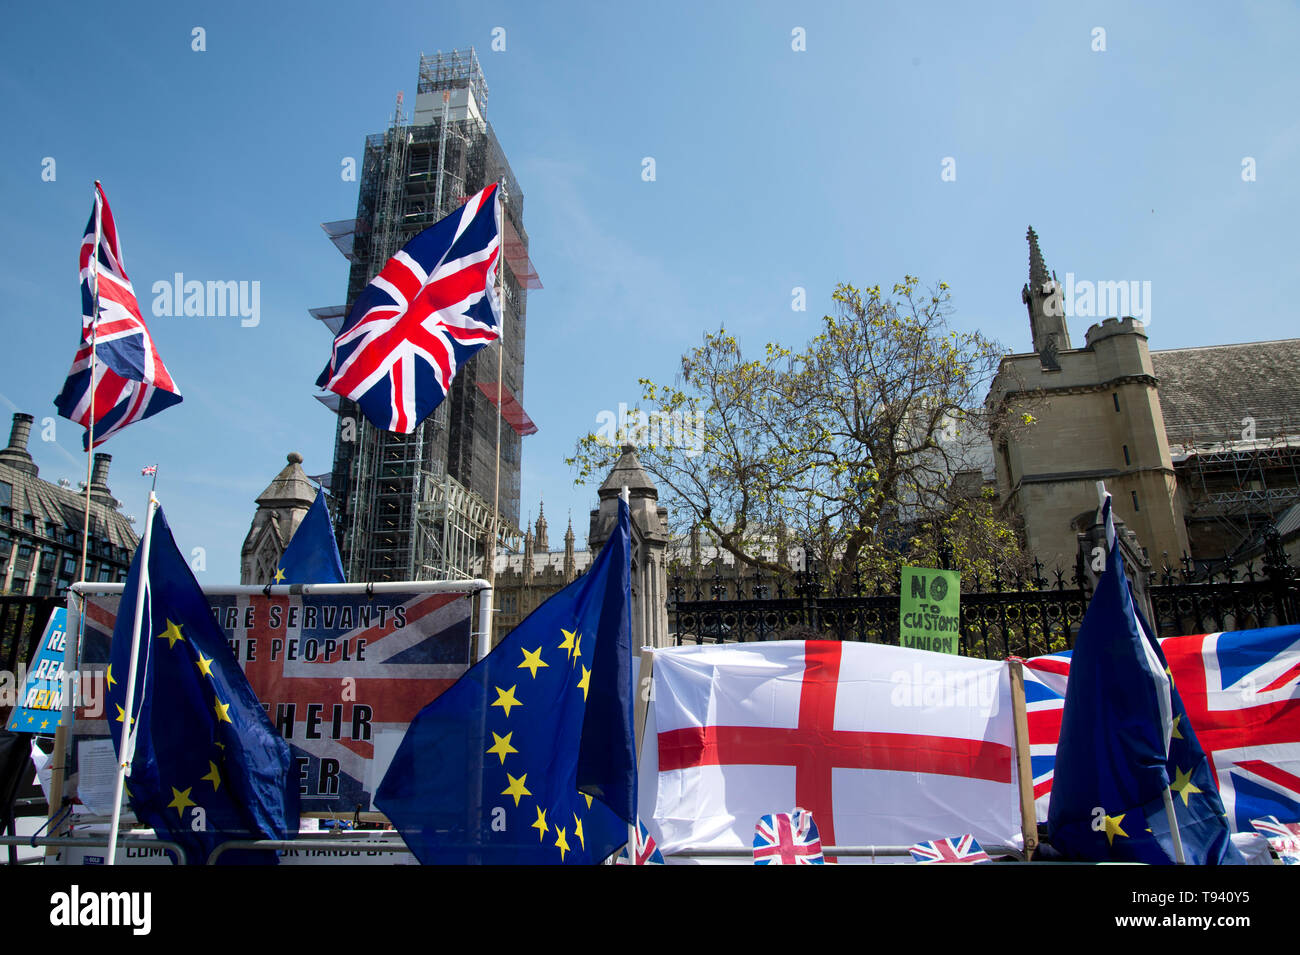 Parliament Square, Westminster, London. May 16th 2019. Flags - English and European. Stock Photo